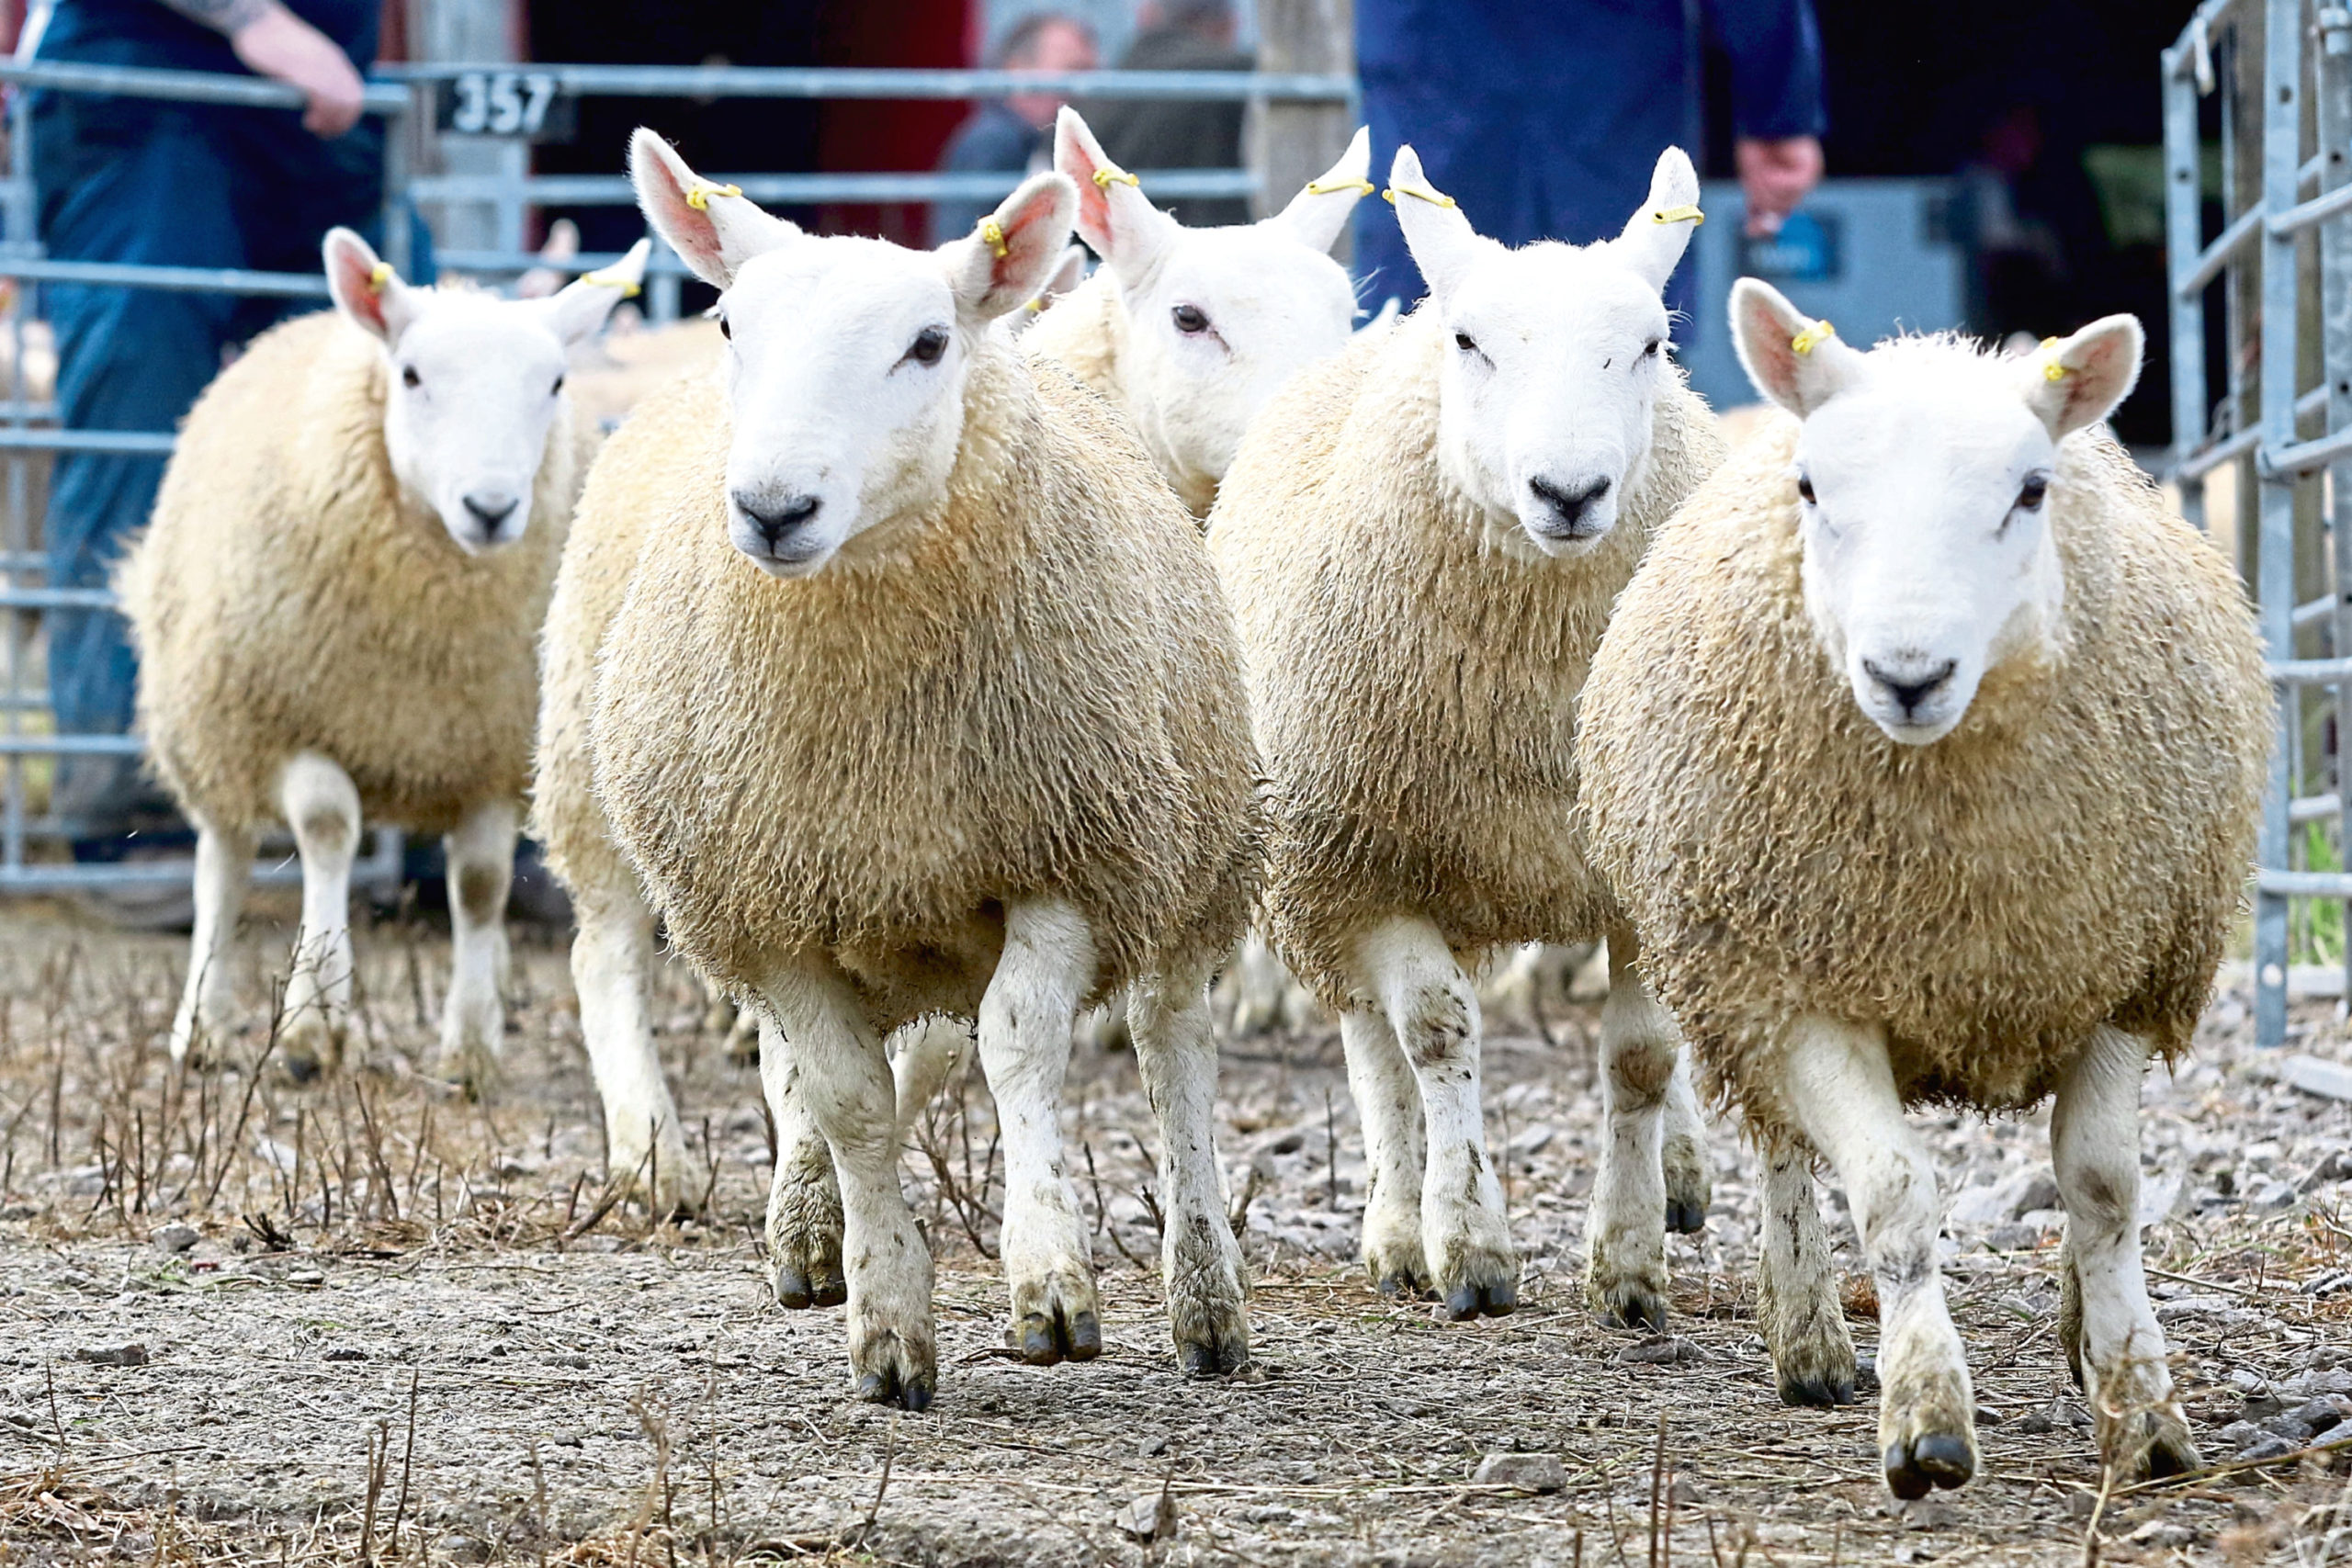 Store lamb trade has "started with confidence" according to George Purves from United Auctions.